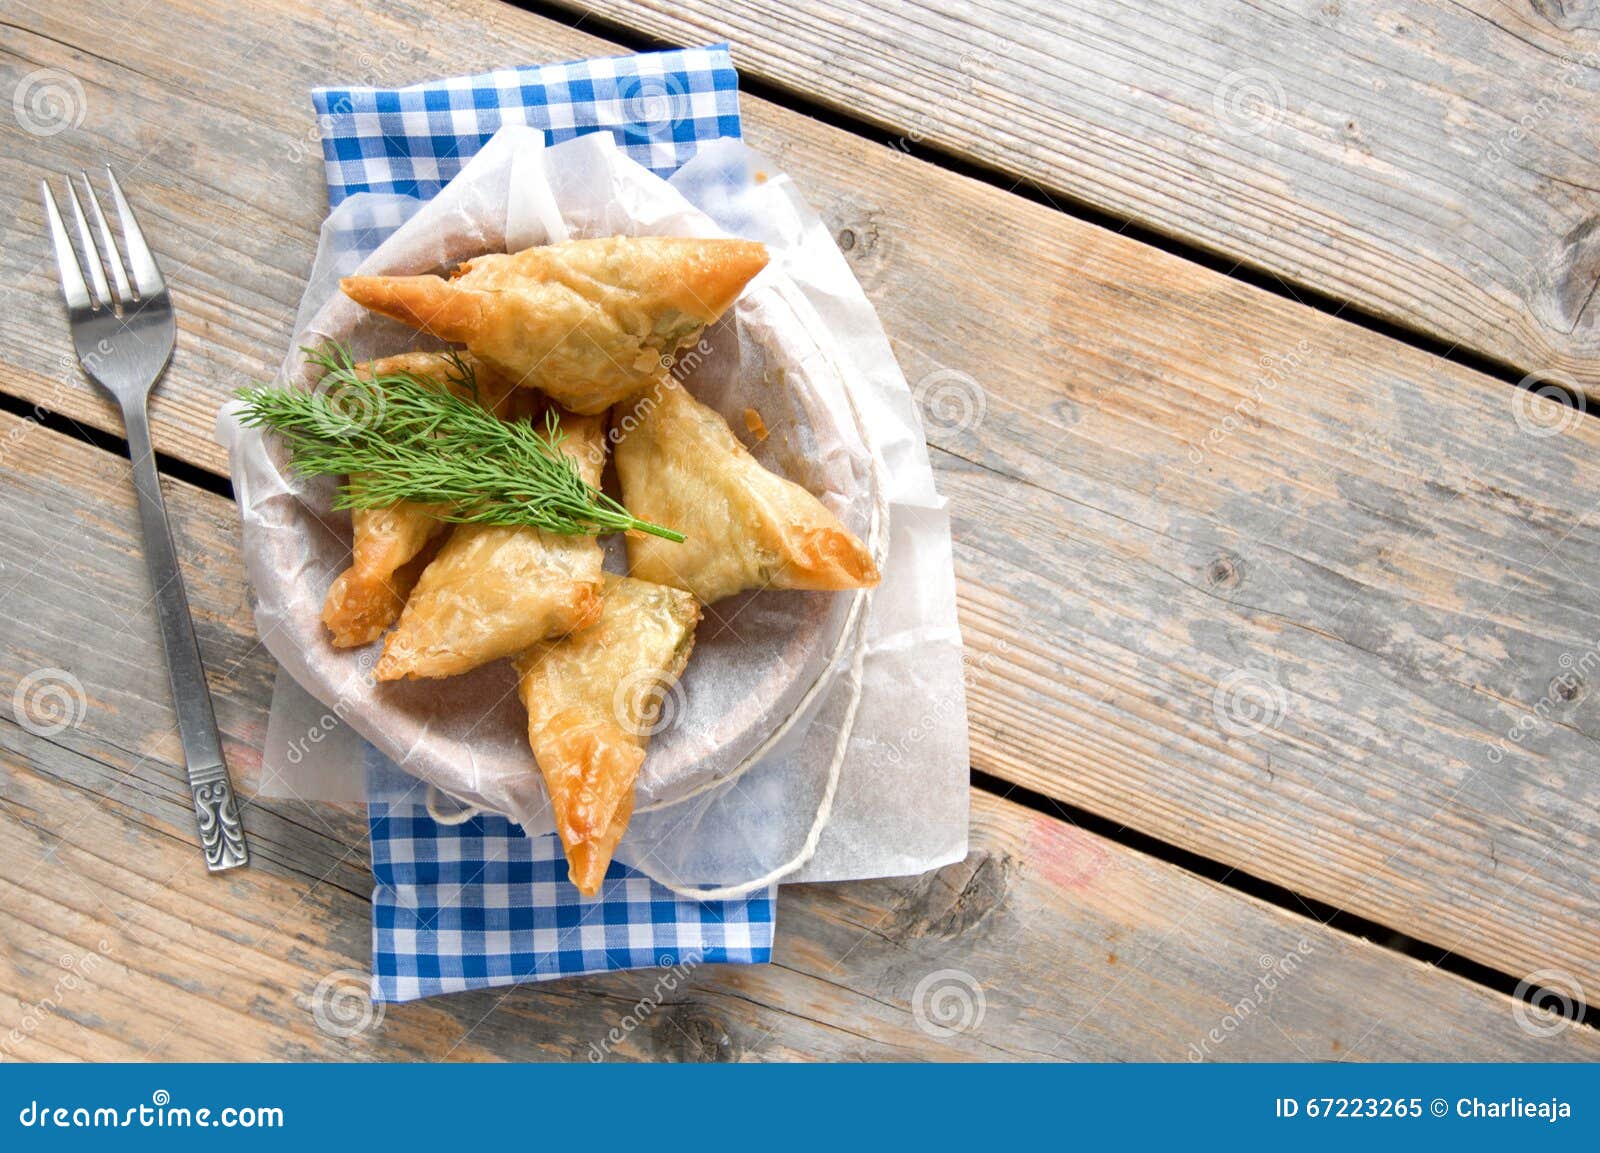 greek feta and spinach filo pastry triangles